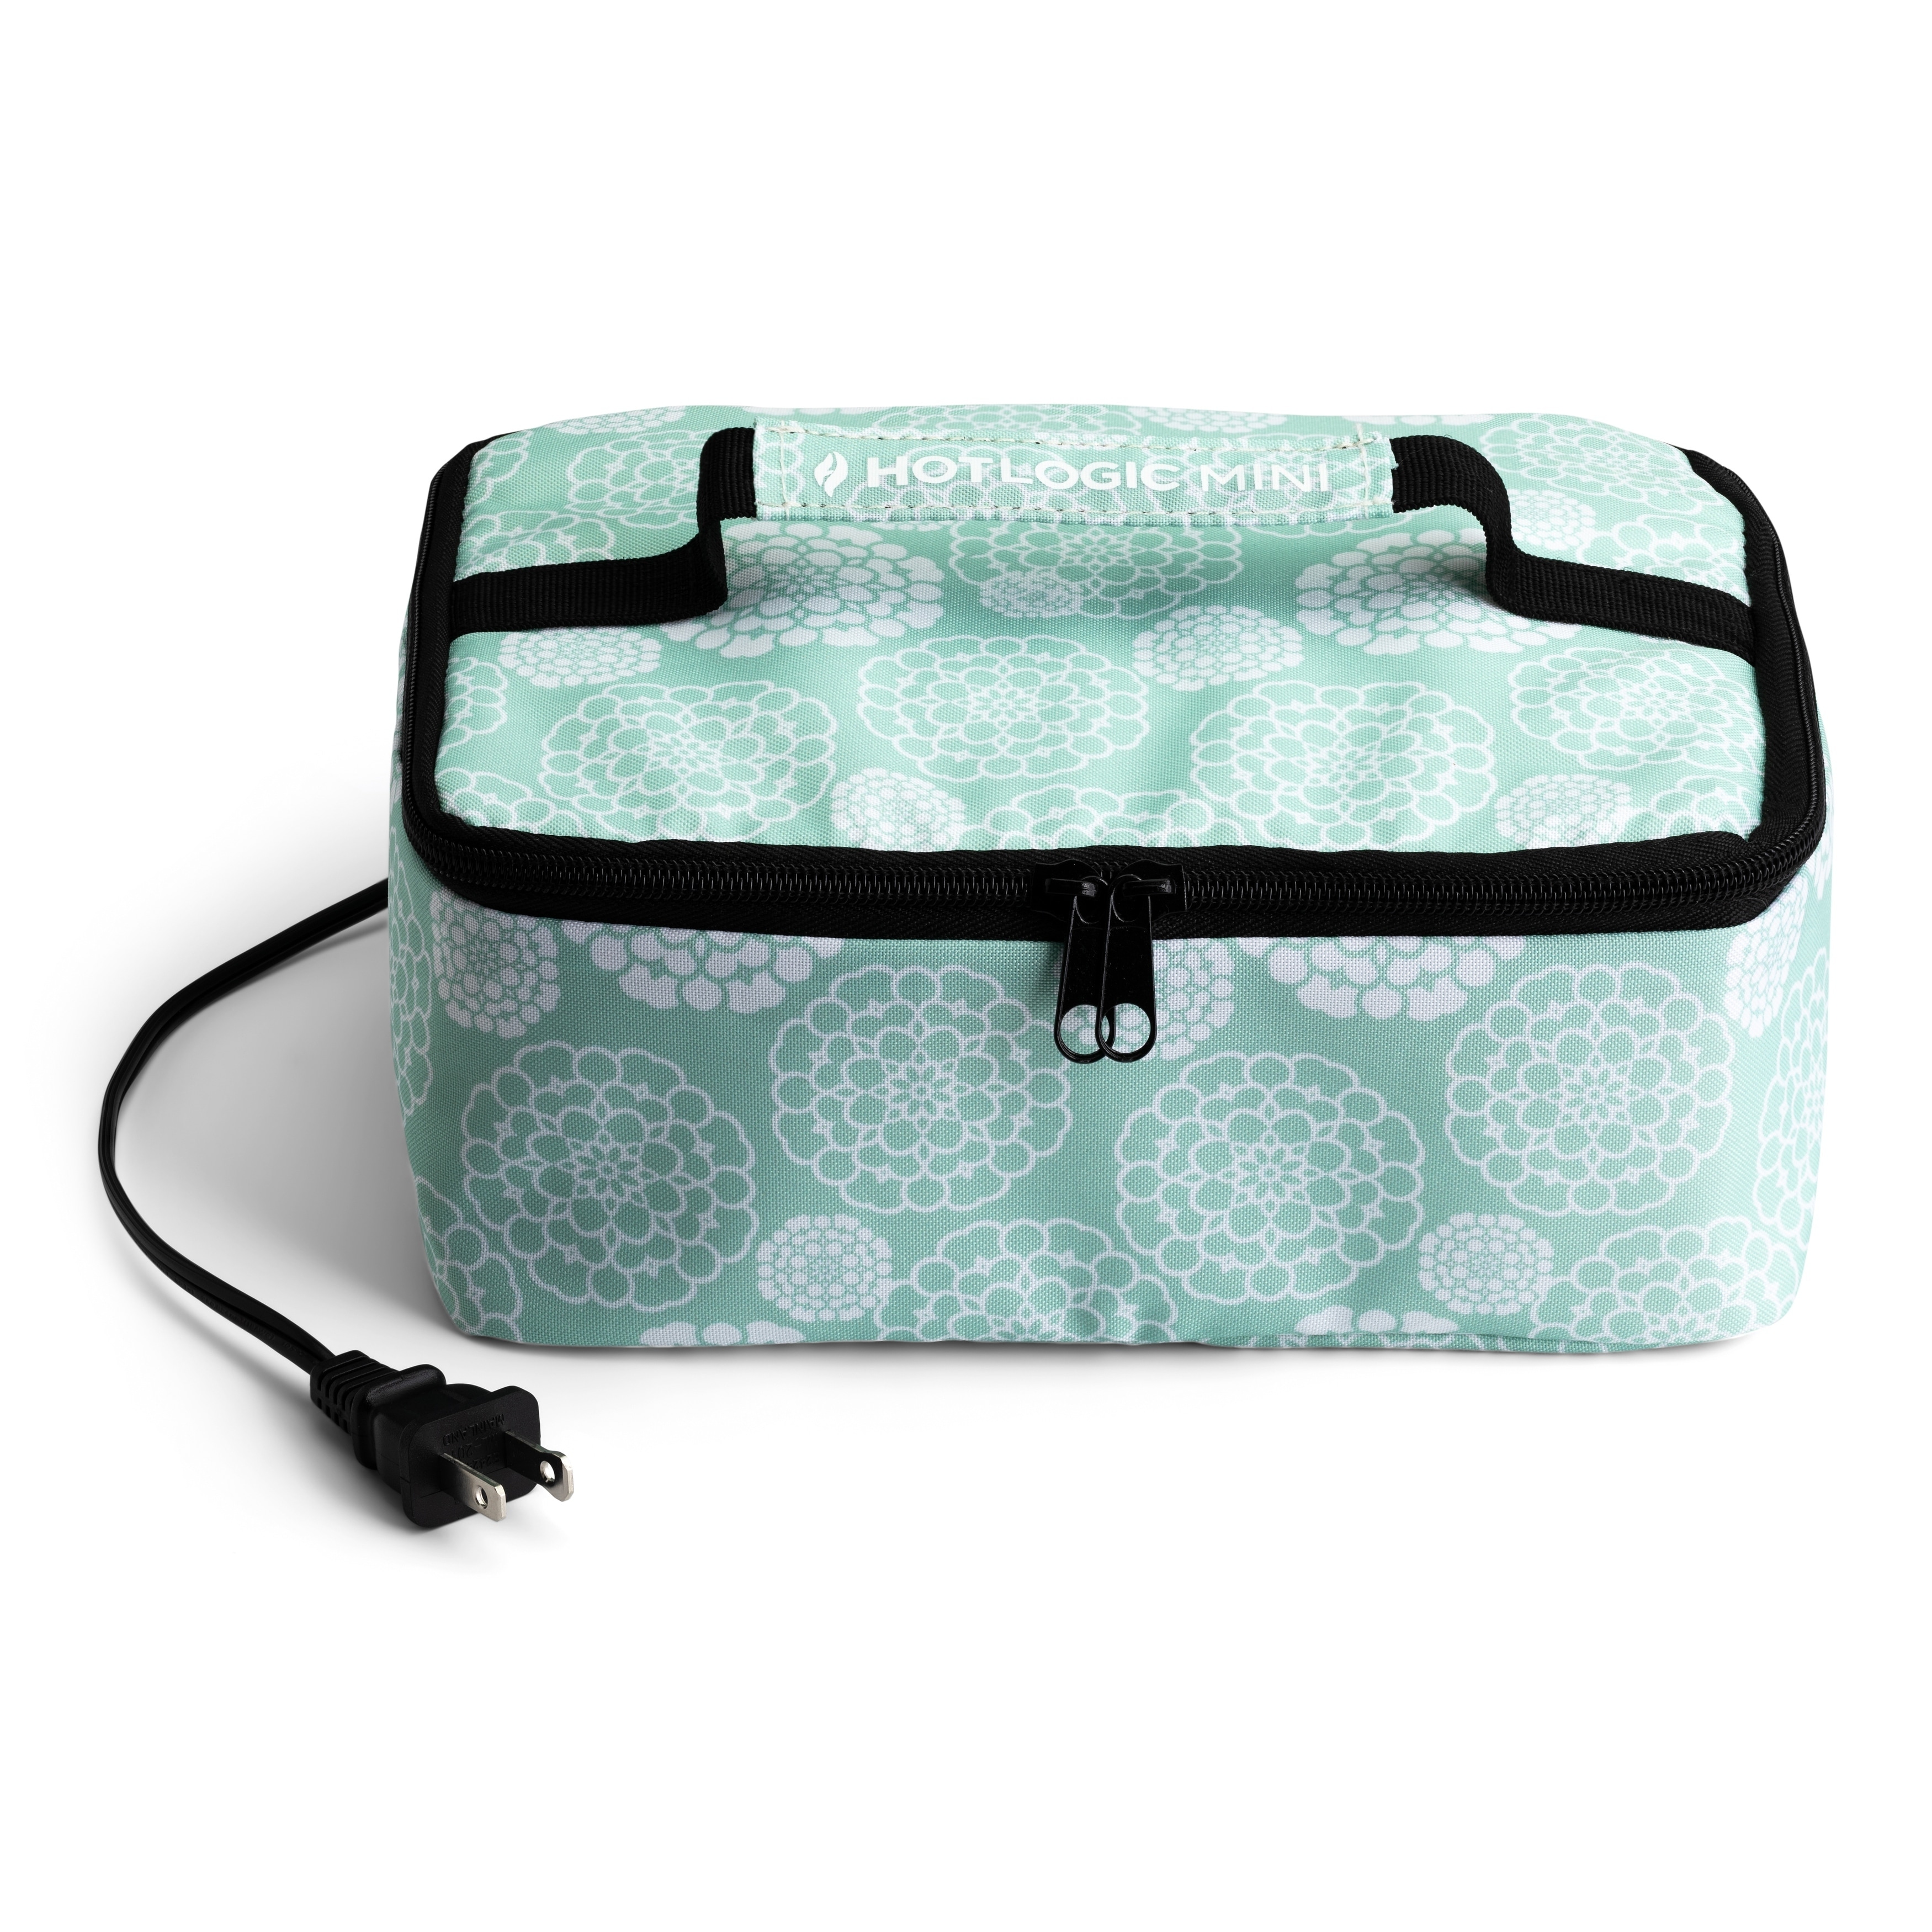 https://ak1.ostkcdn.com/images/products/29602651/HotLogic-Food-Warming-Tote-Blue-Floral-0c5d27e5-8657-4c77-8806-689959bf642c.jpg